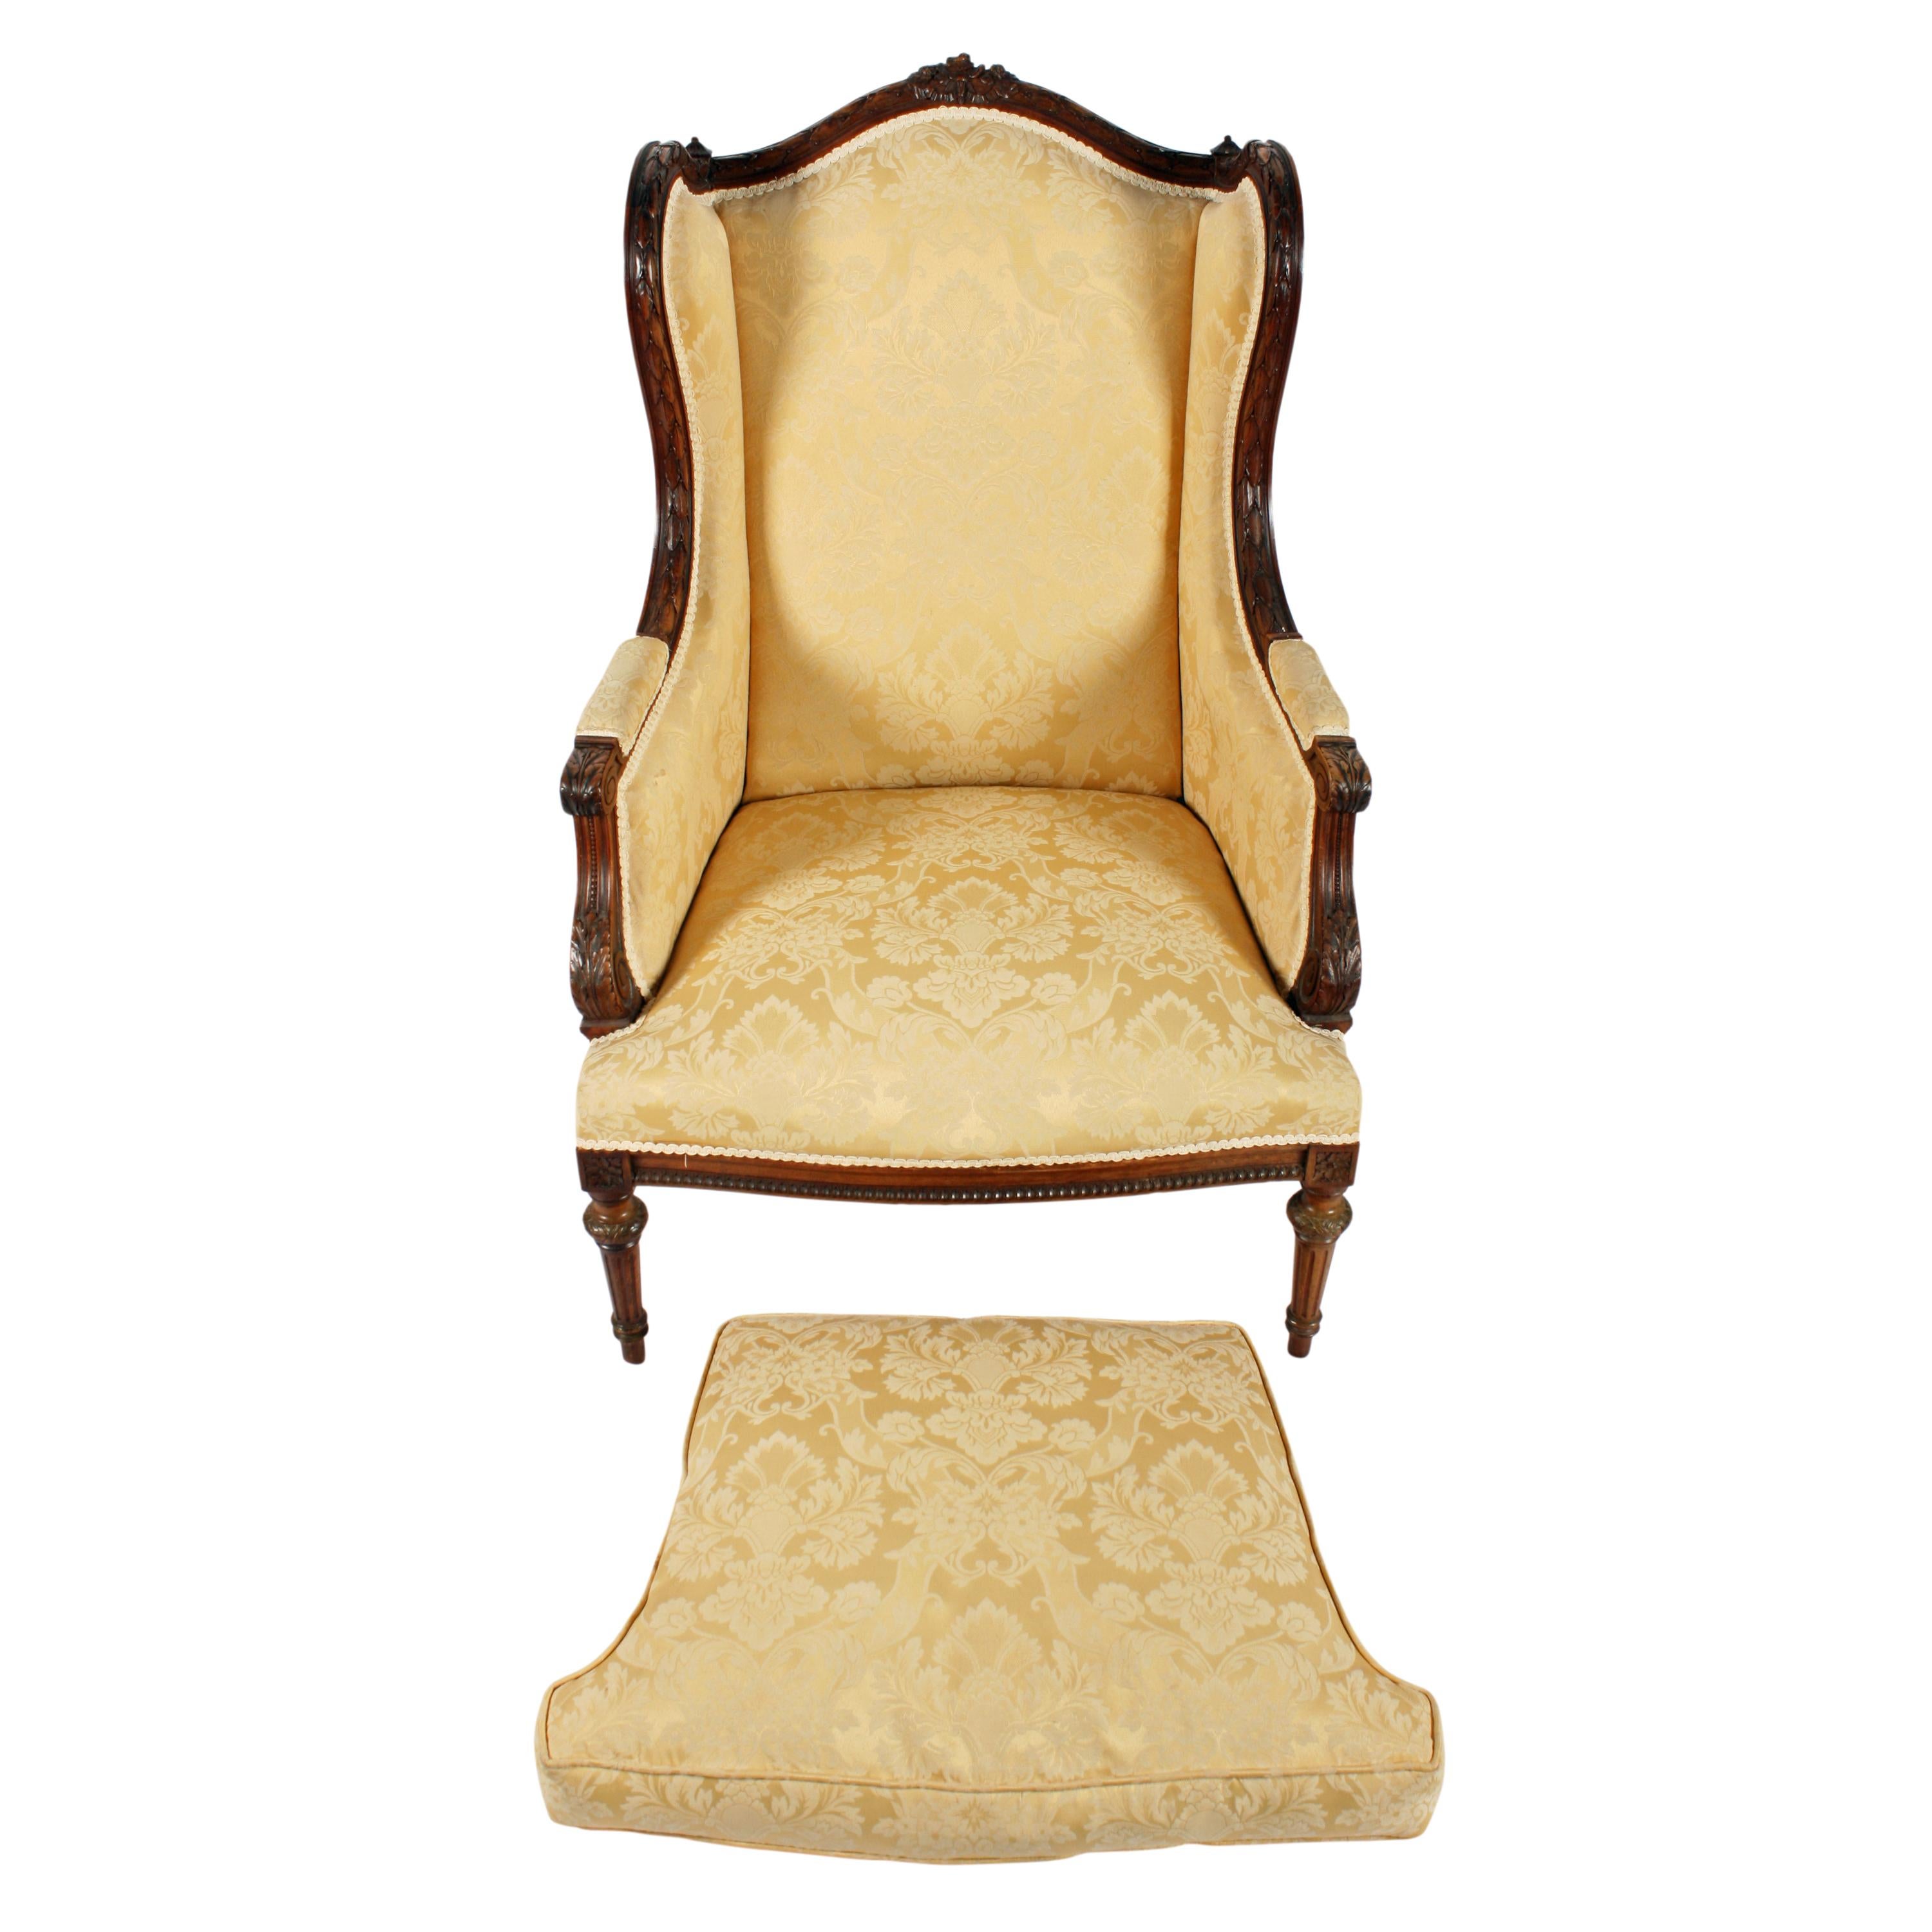 19th Century French Walnut Fauteuil Upholstered Easy chair For Sale 3